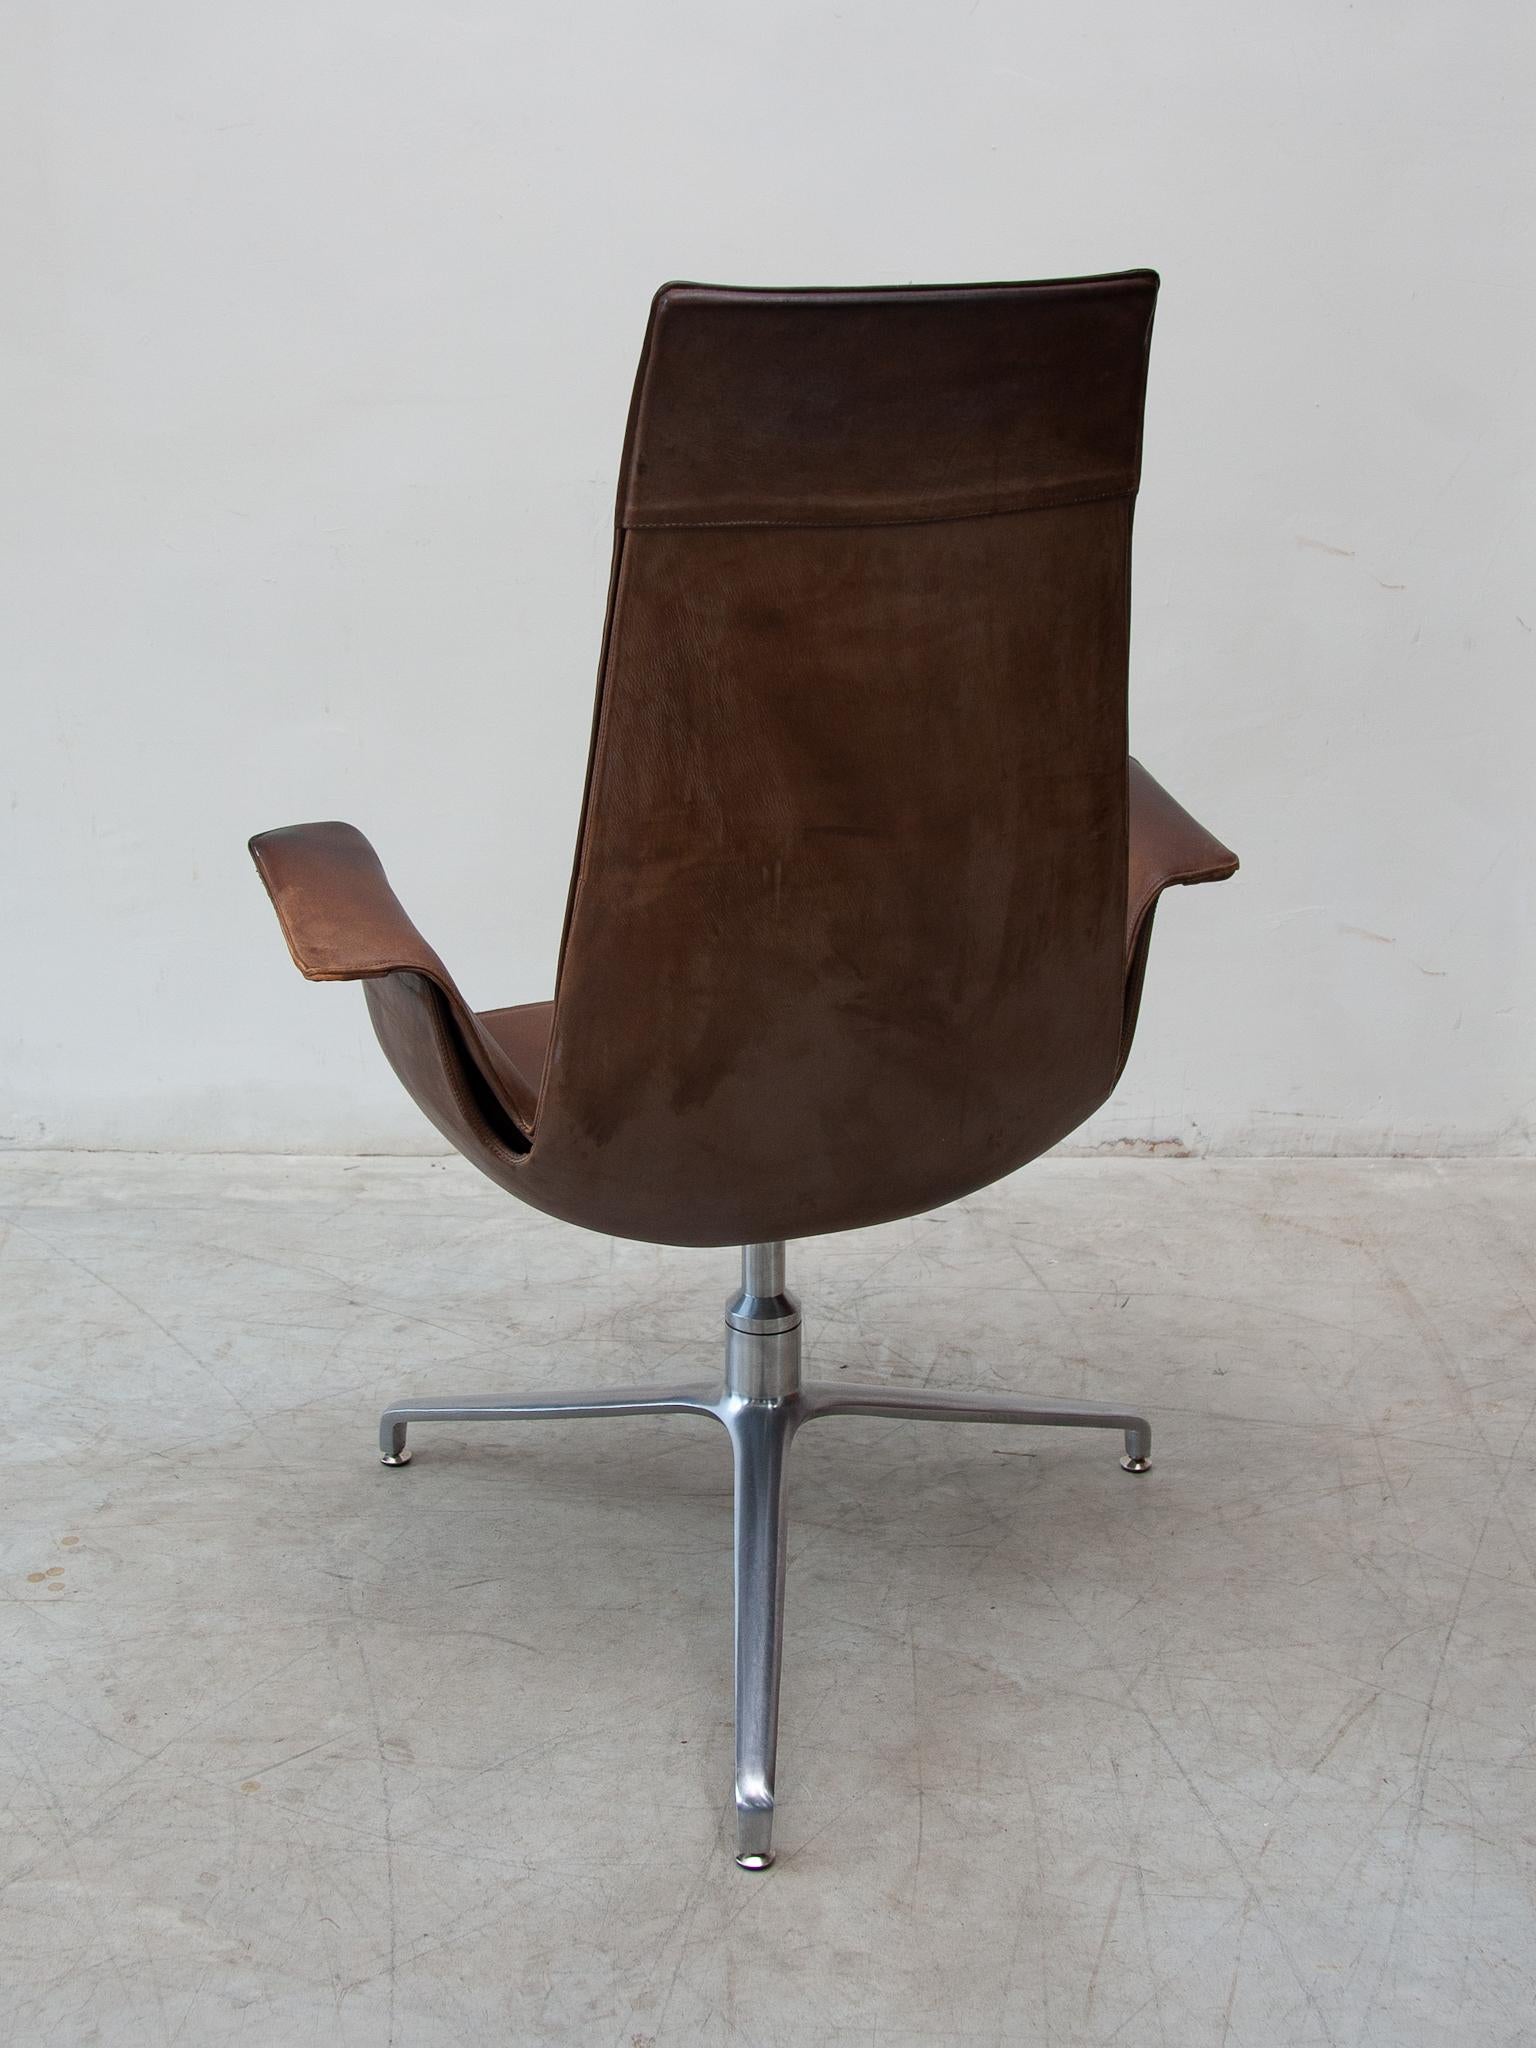 Fabricius & Kastholm FK6725 Desk, Lounge Chair in Brown Leather, Kill 1